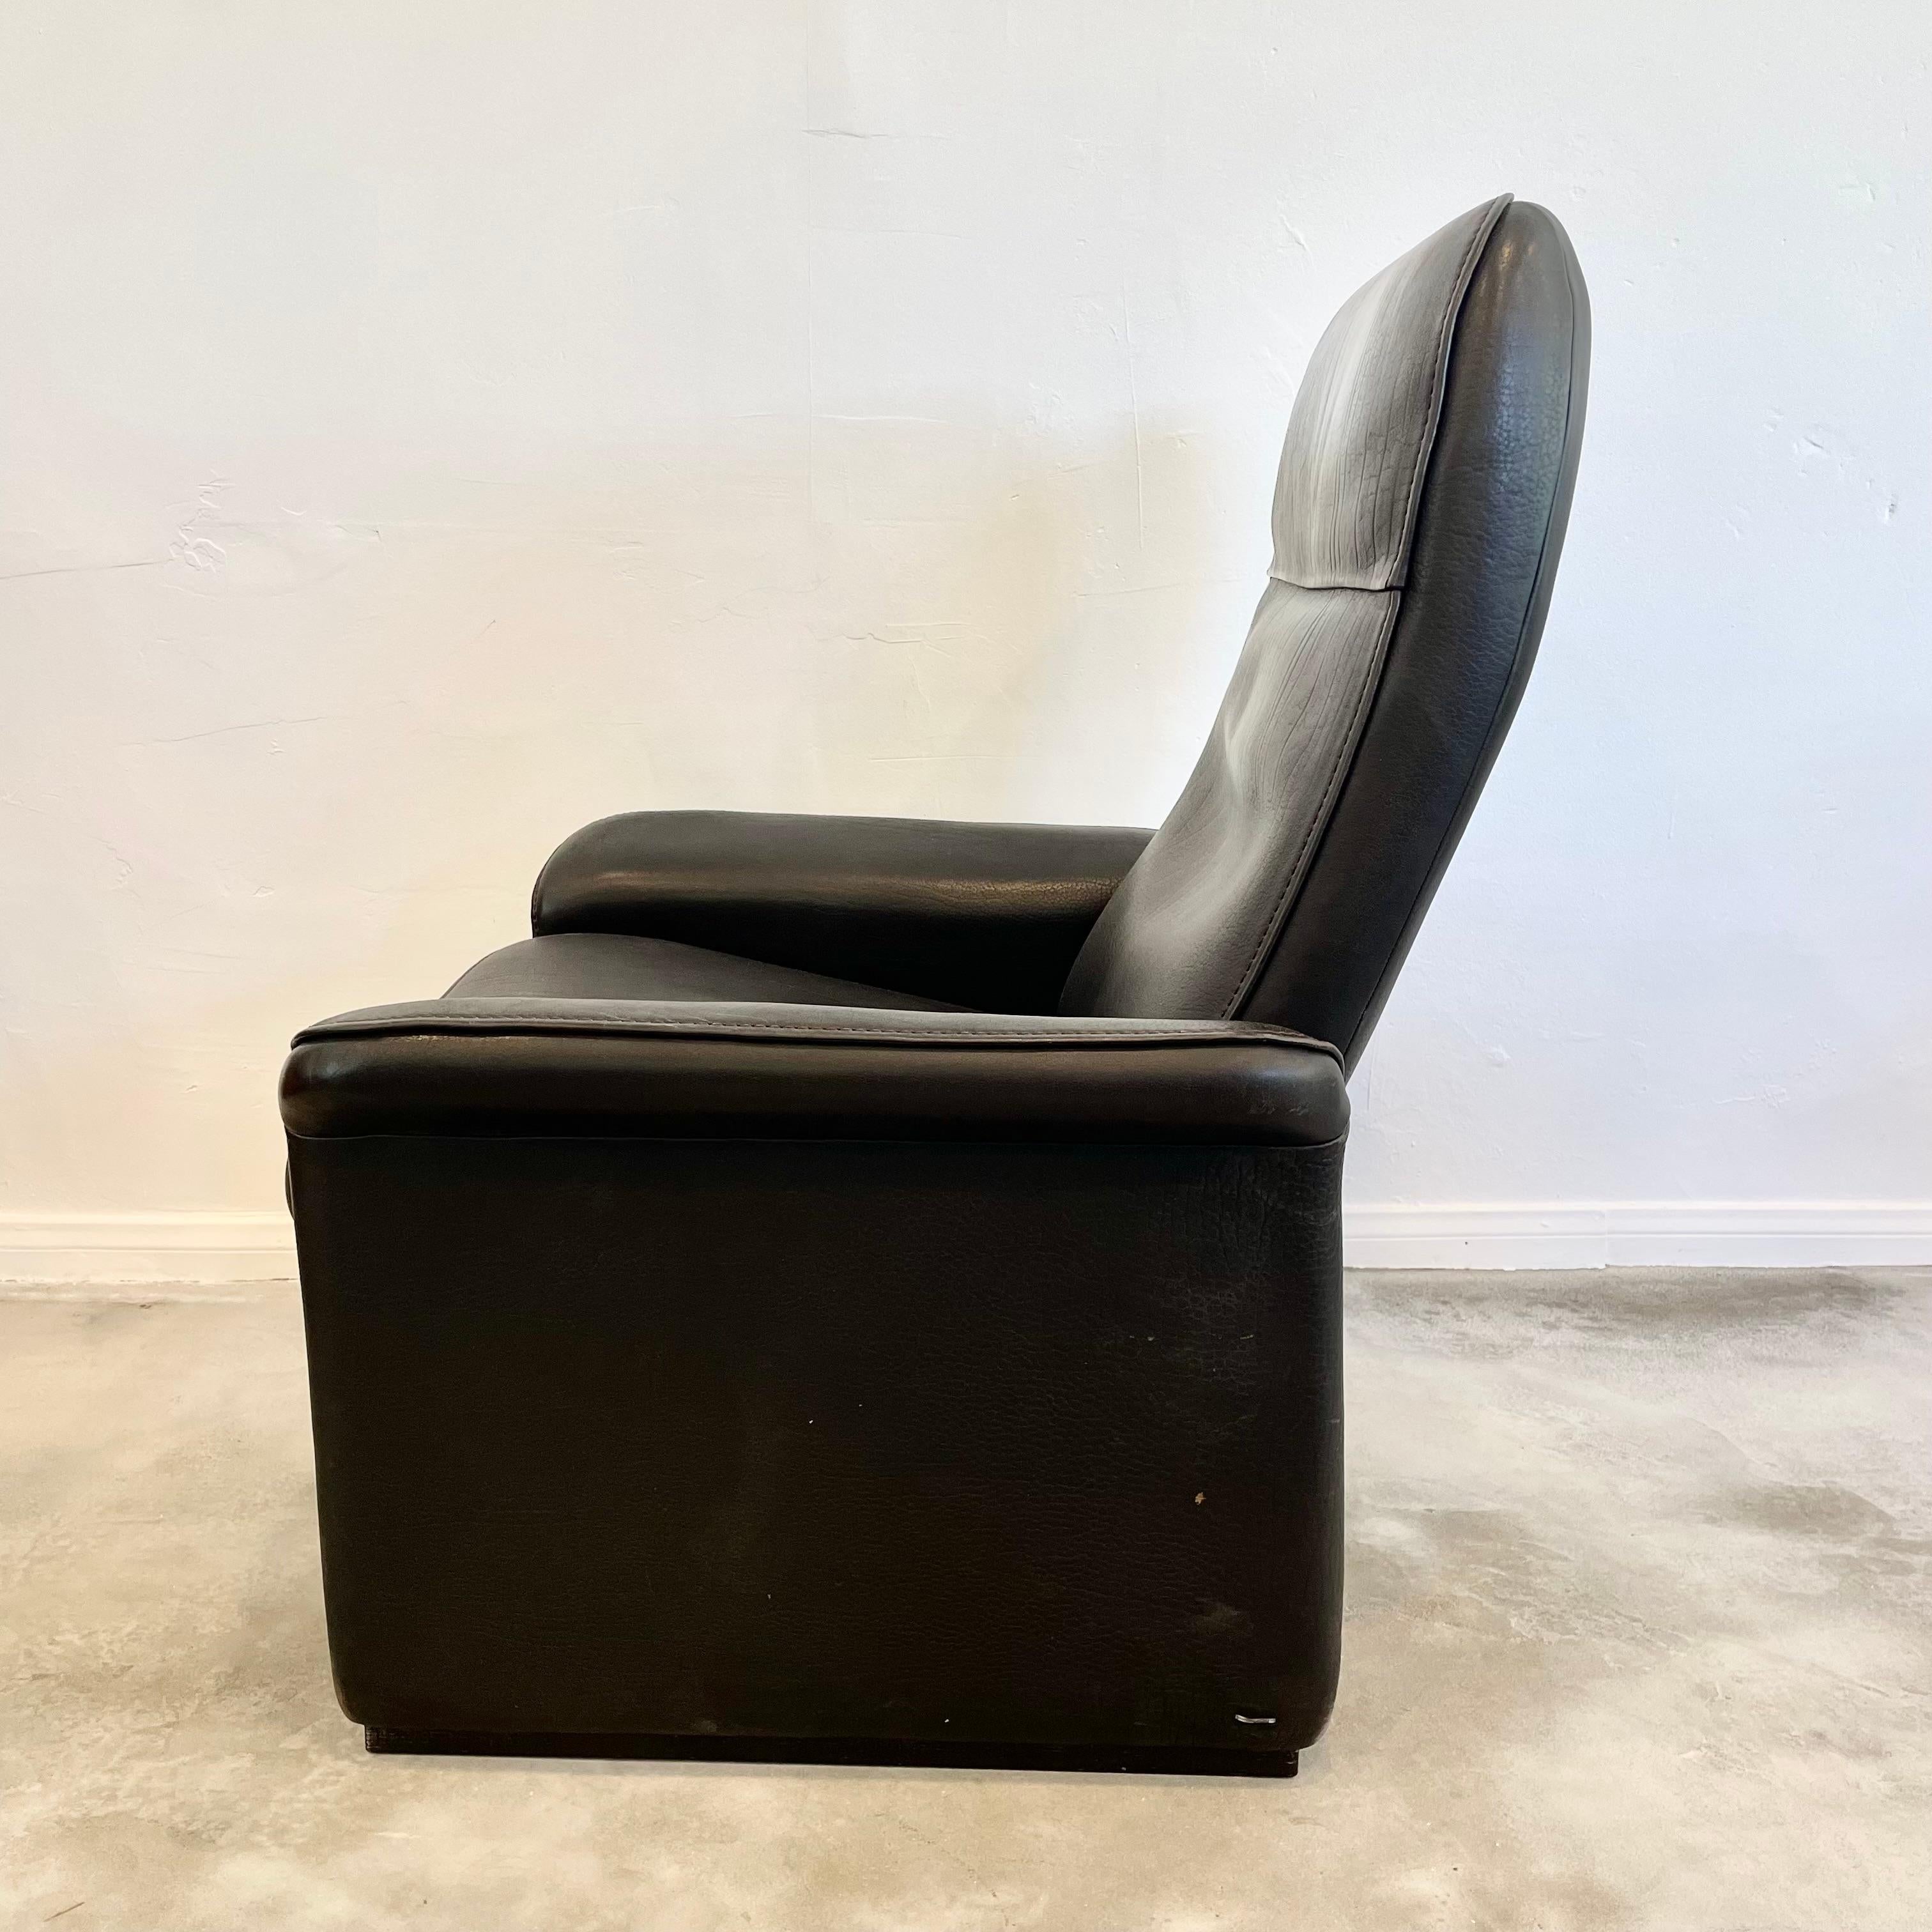 Pair of De Sede DS-50 Black Leather Recliner Chairs, 1970s Switzerland For Sale 10